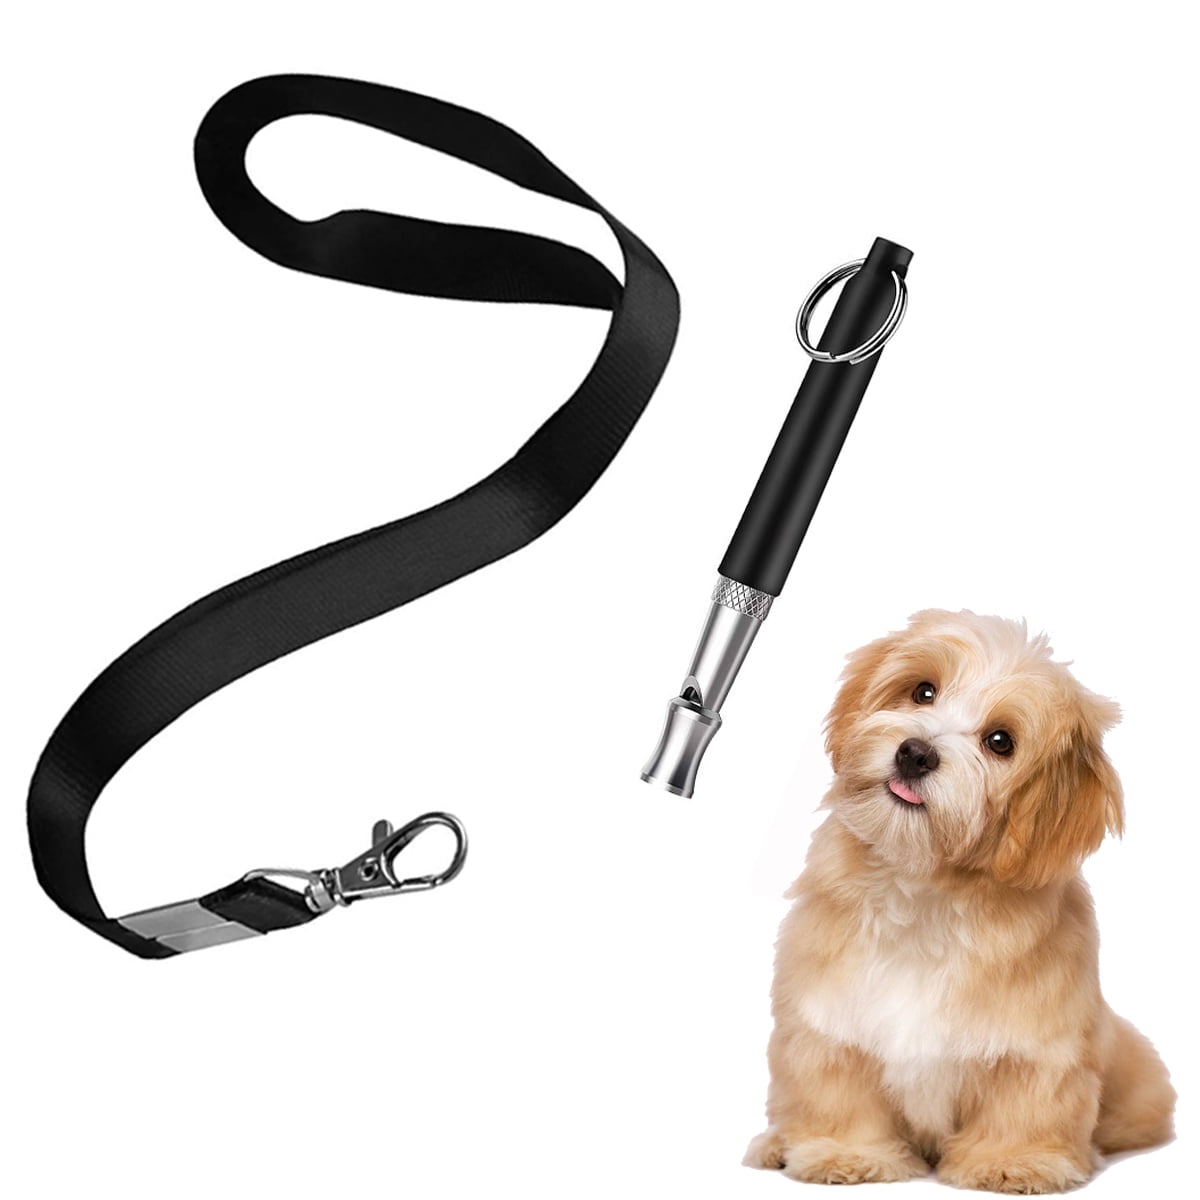 Ultrasonic Dog Whistle Adjustable Frequencies 3pcs Dog Whistle for Stop Barking & Recall 3 Free Lanyard Strap